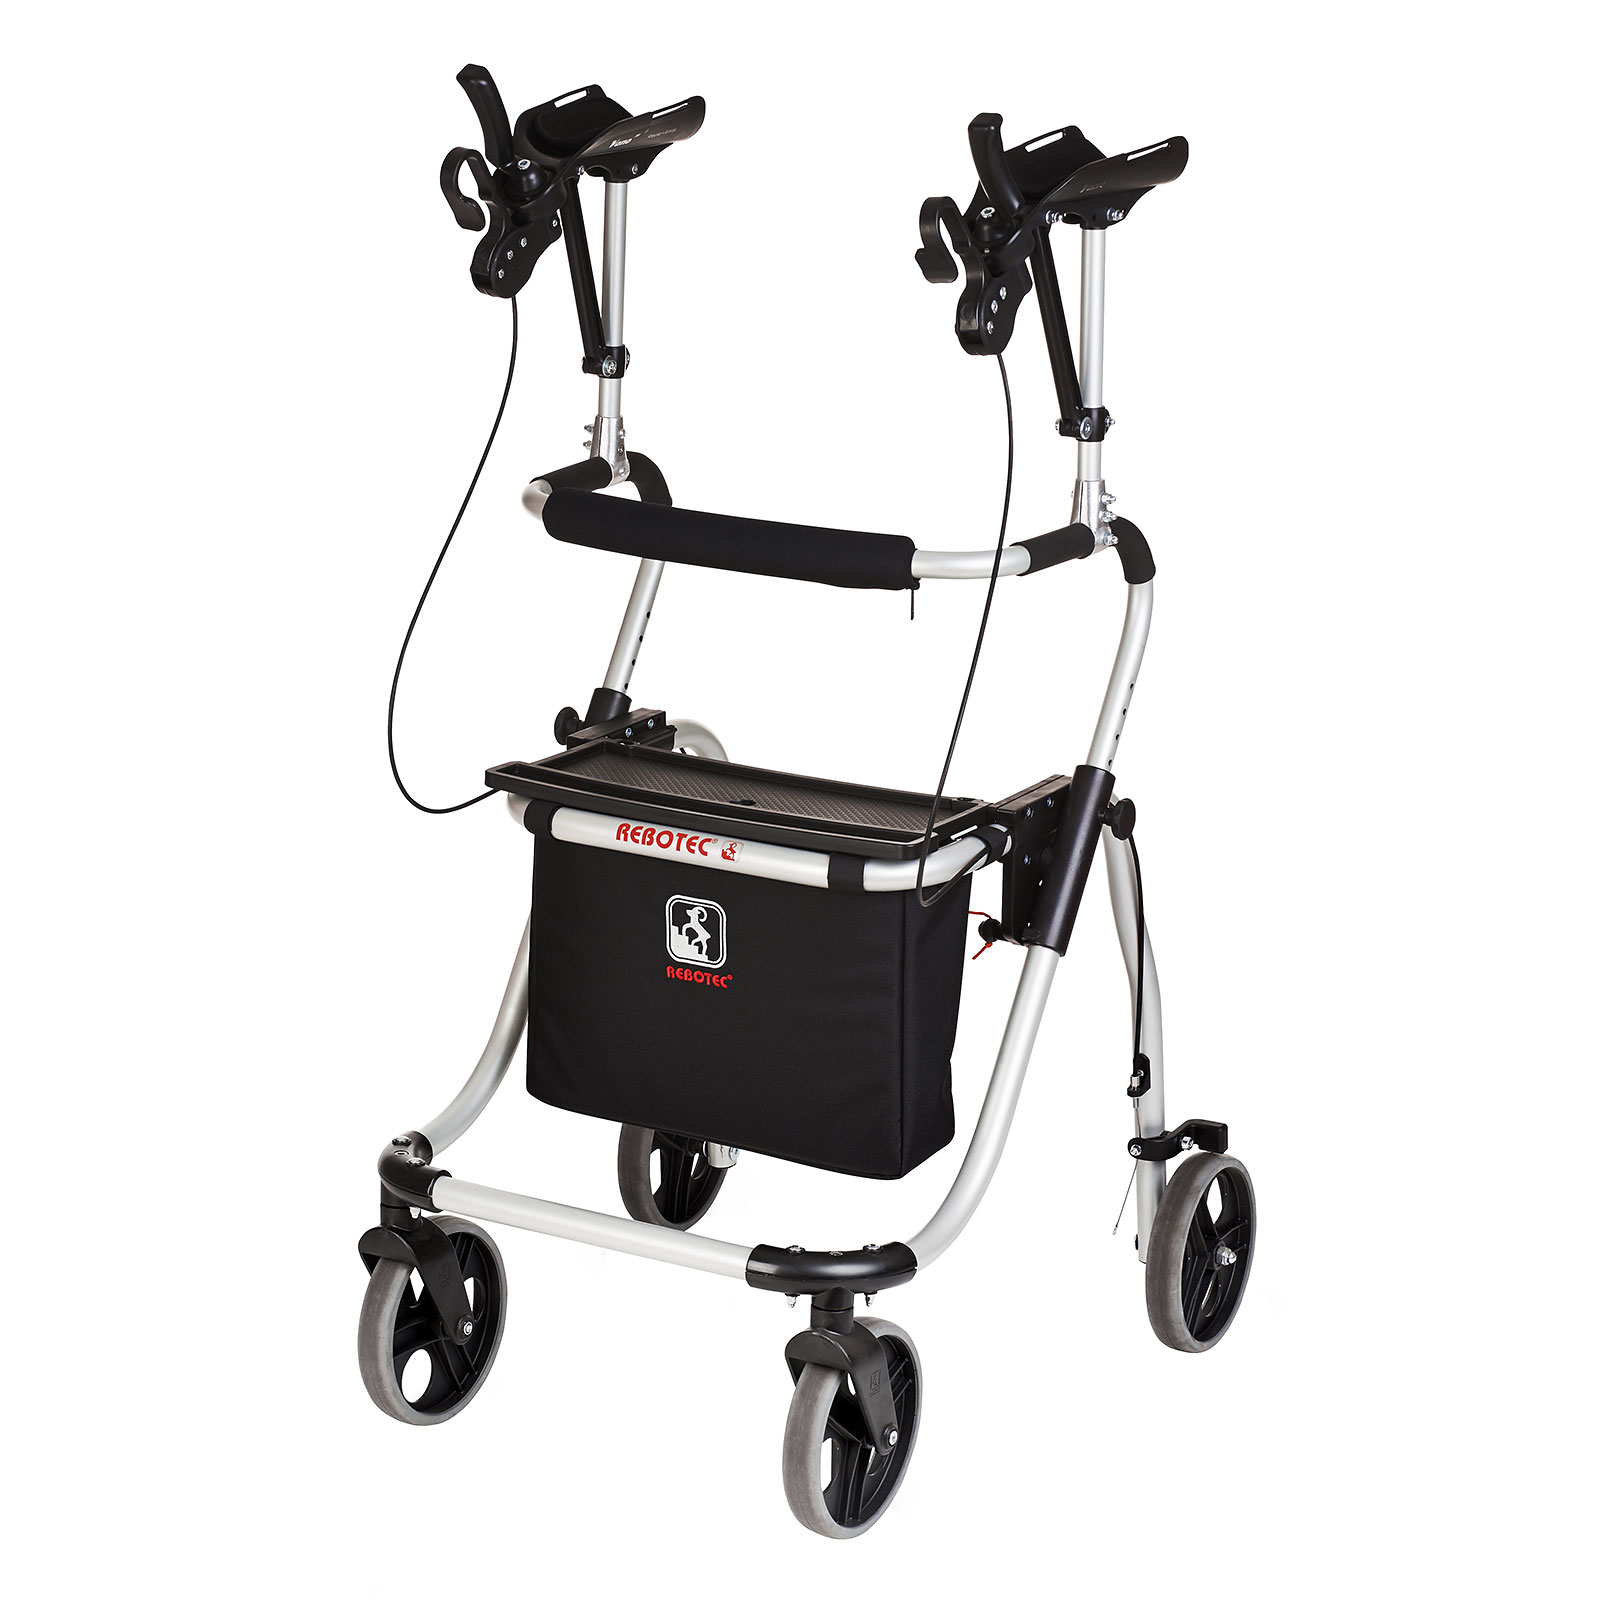 Yano Upright Rollator / Rollator Walker with Seat and Forearm Support